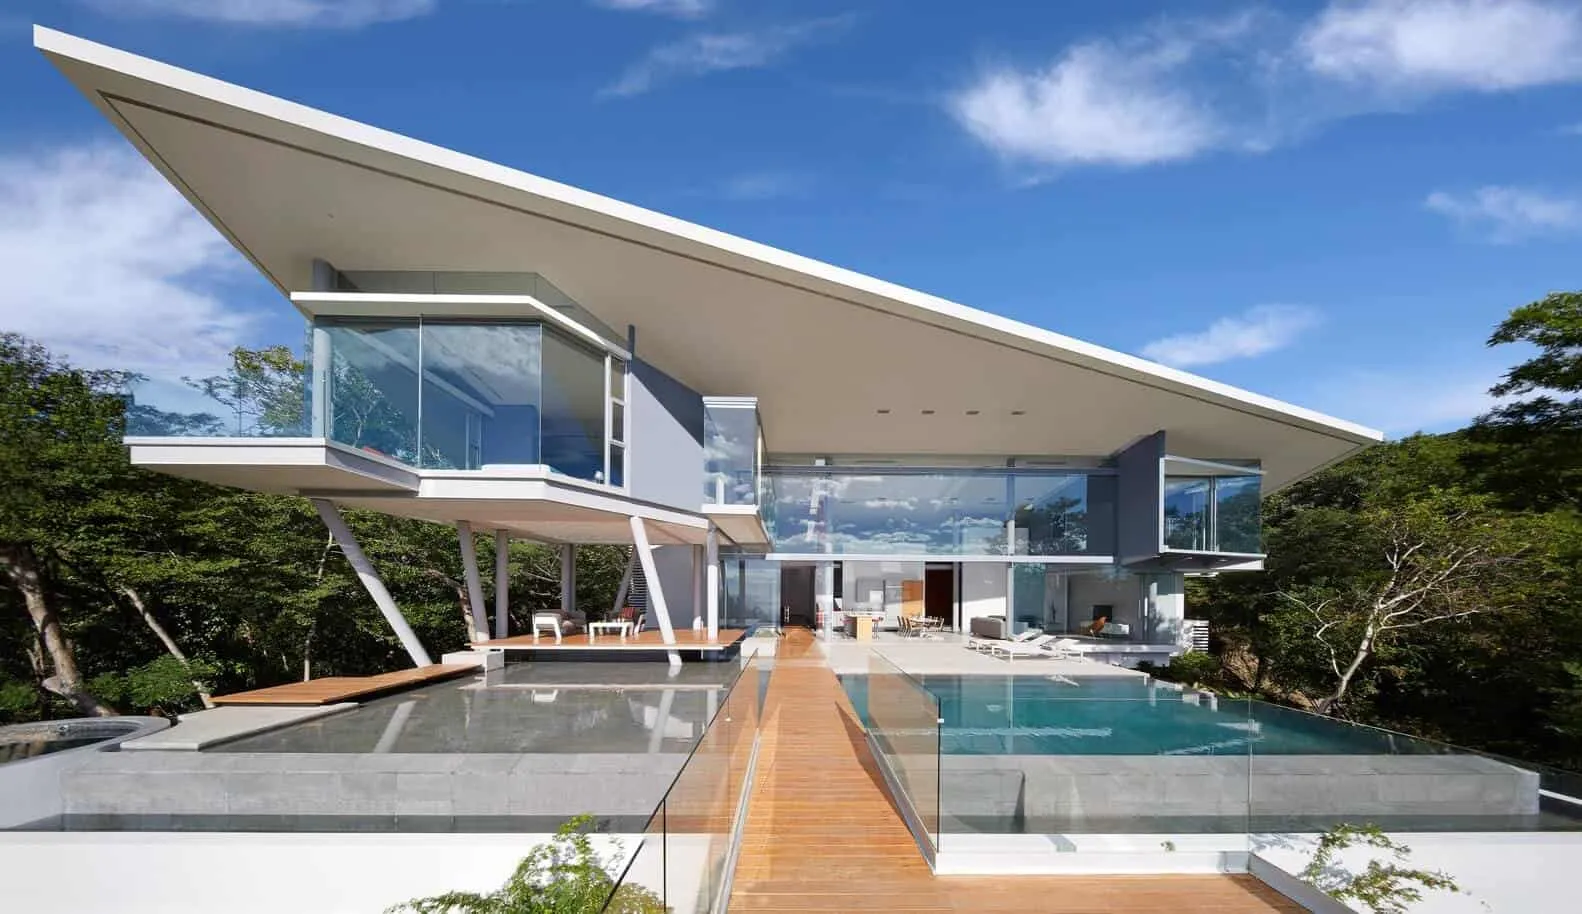 modern home design with a slant roof and glass walls